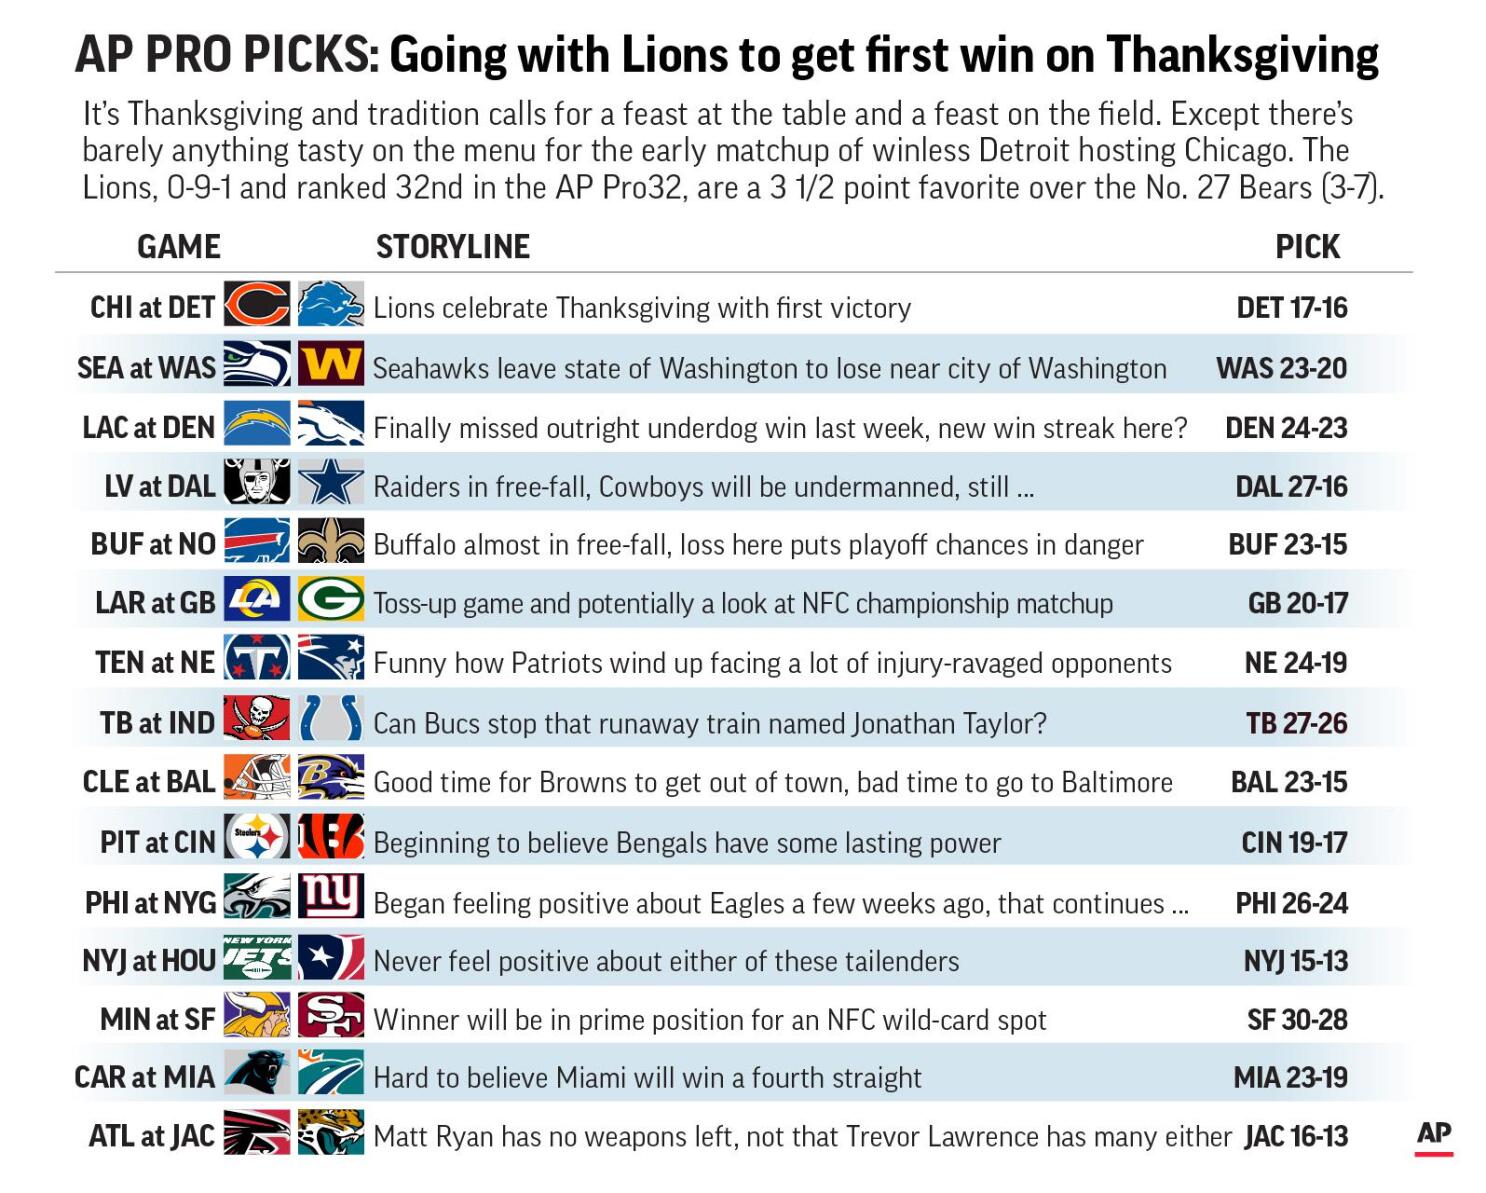 ALL DAY FEAST: Thanksgiving Fun on NFL ALL DAY